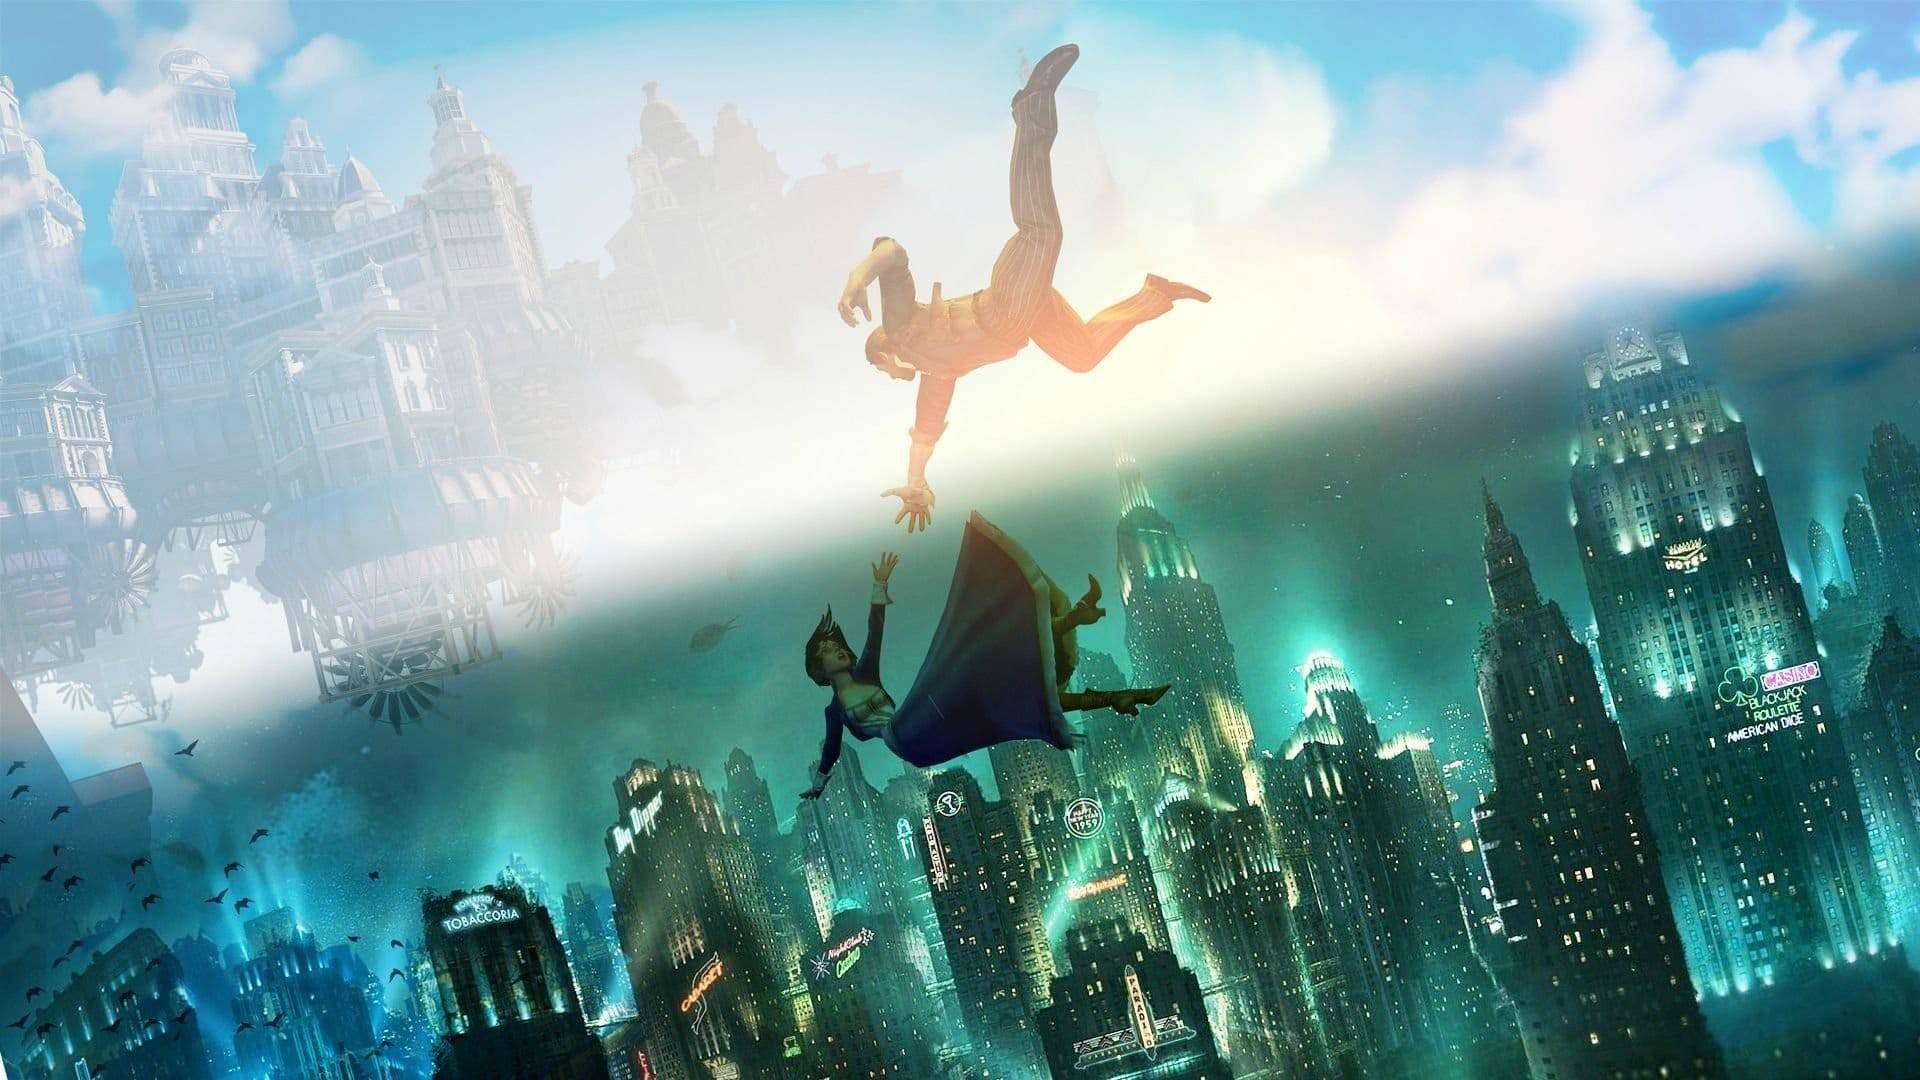 BioShock 4 could feature an open world